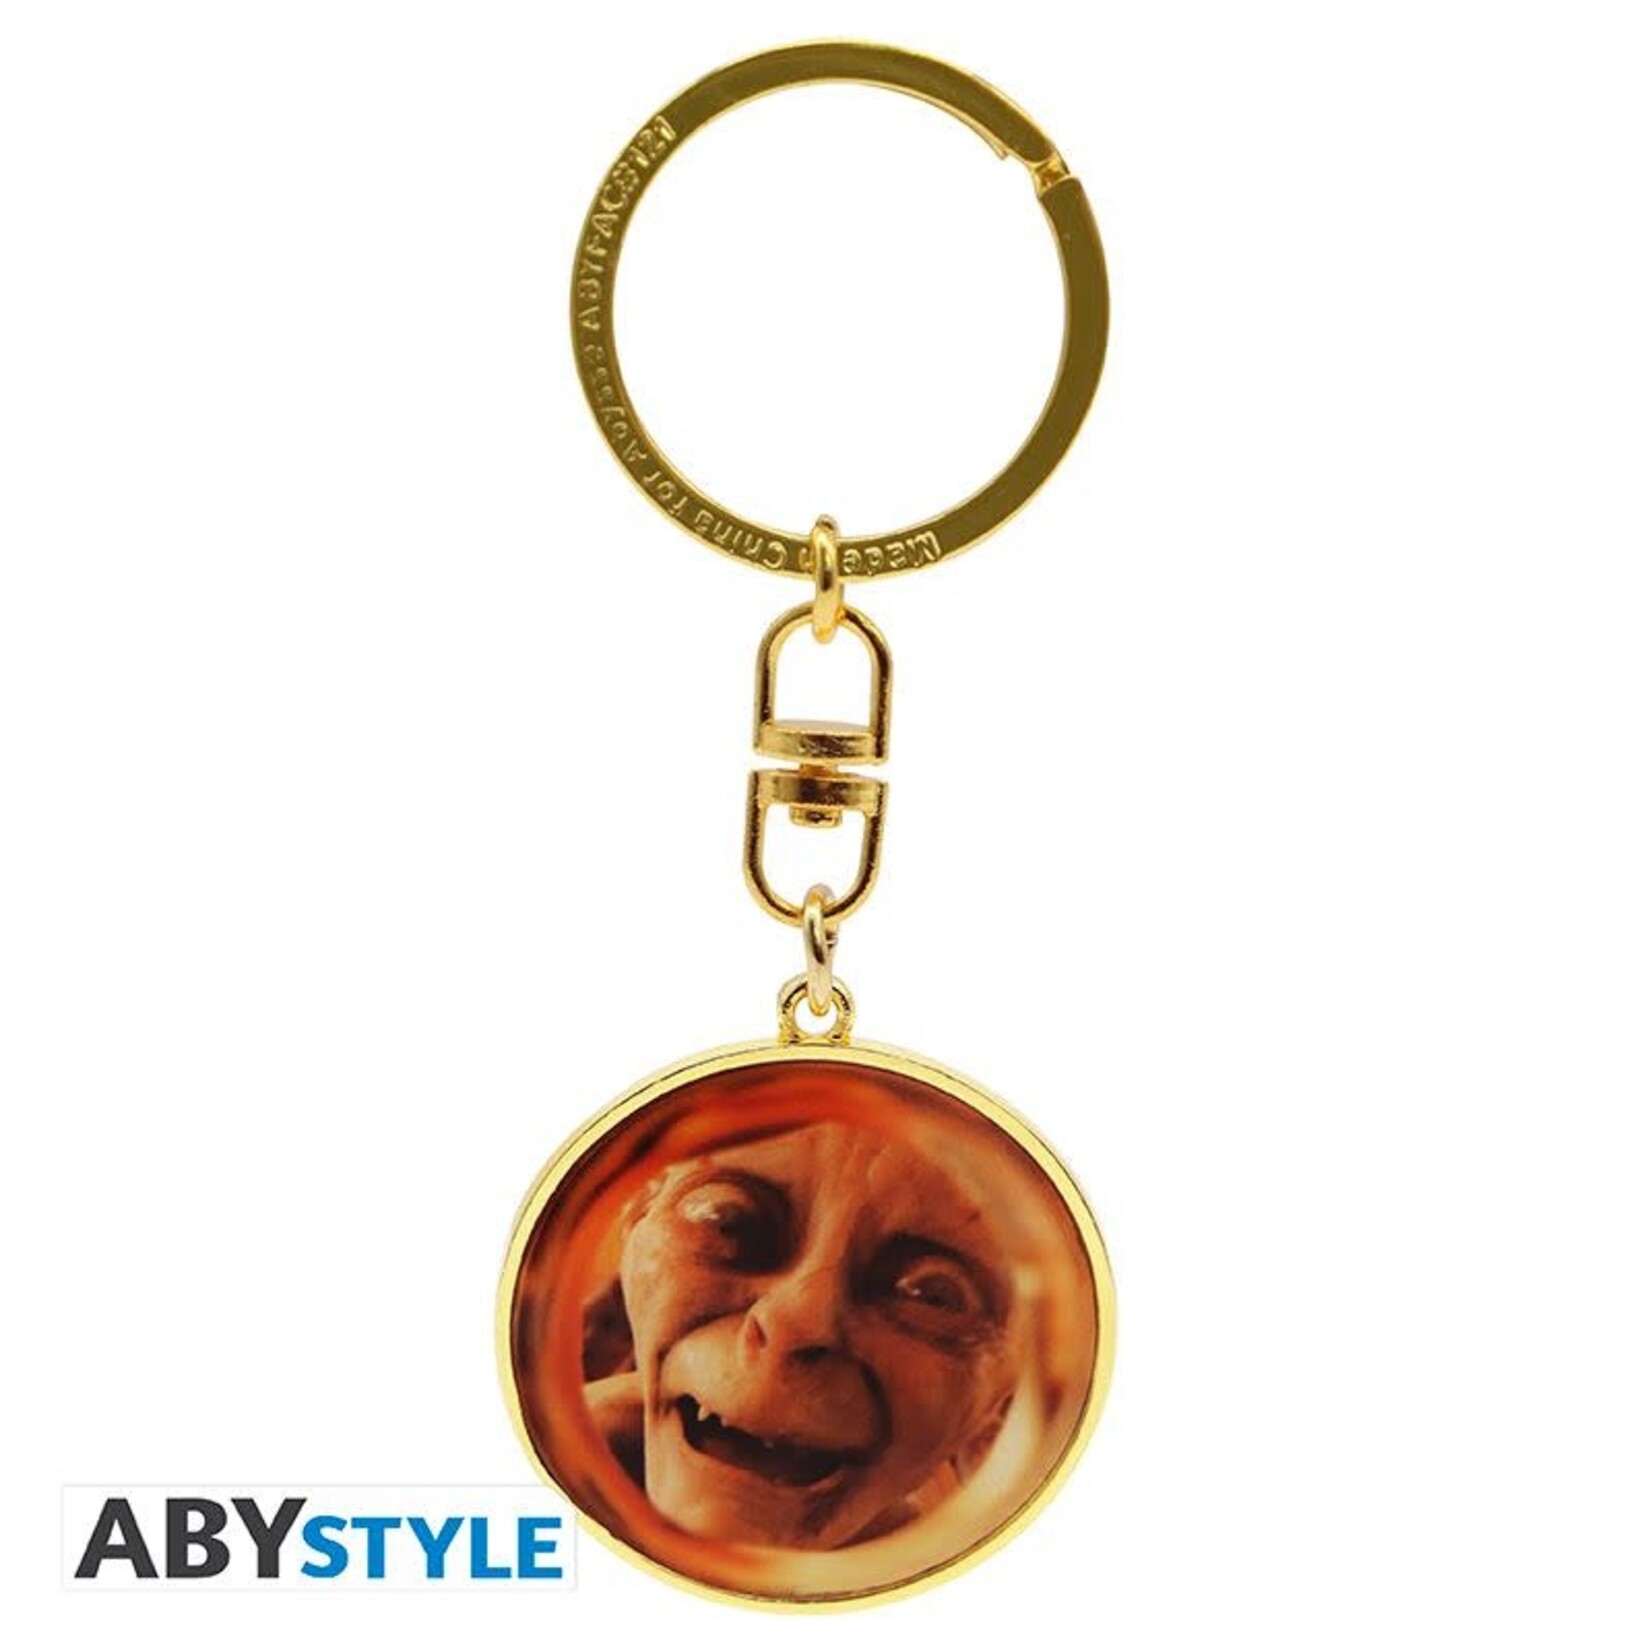 Abysse Lord of the Rings Keychain Gollum